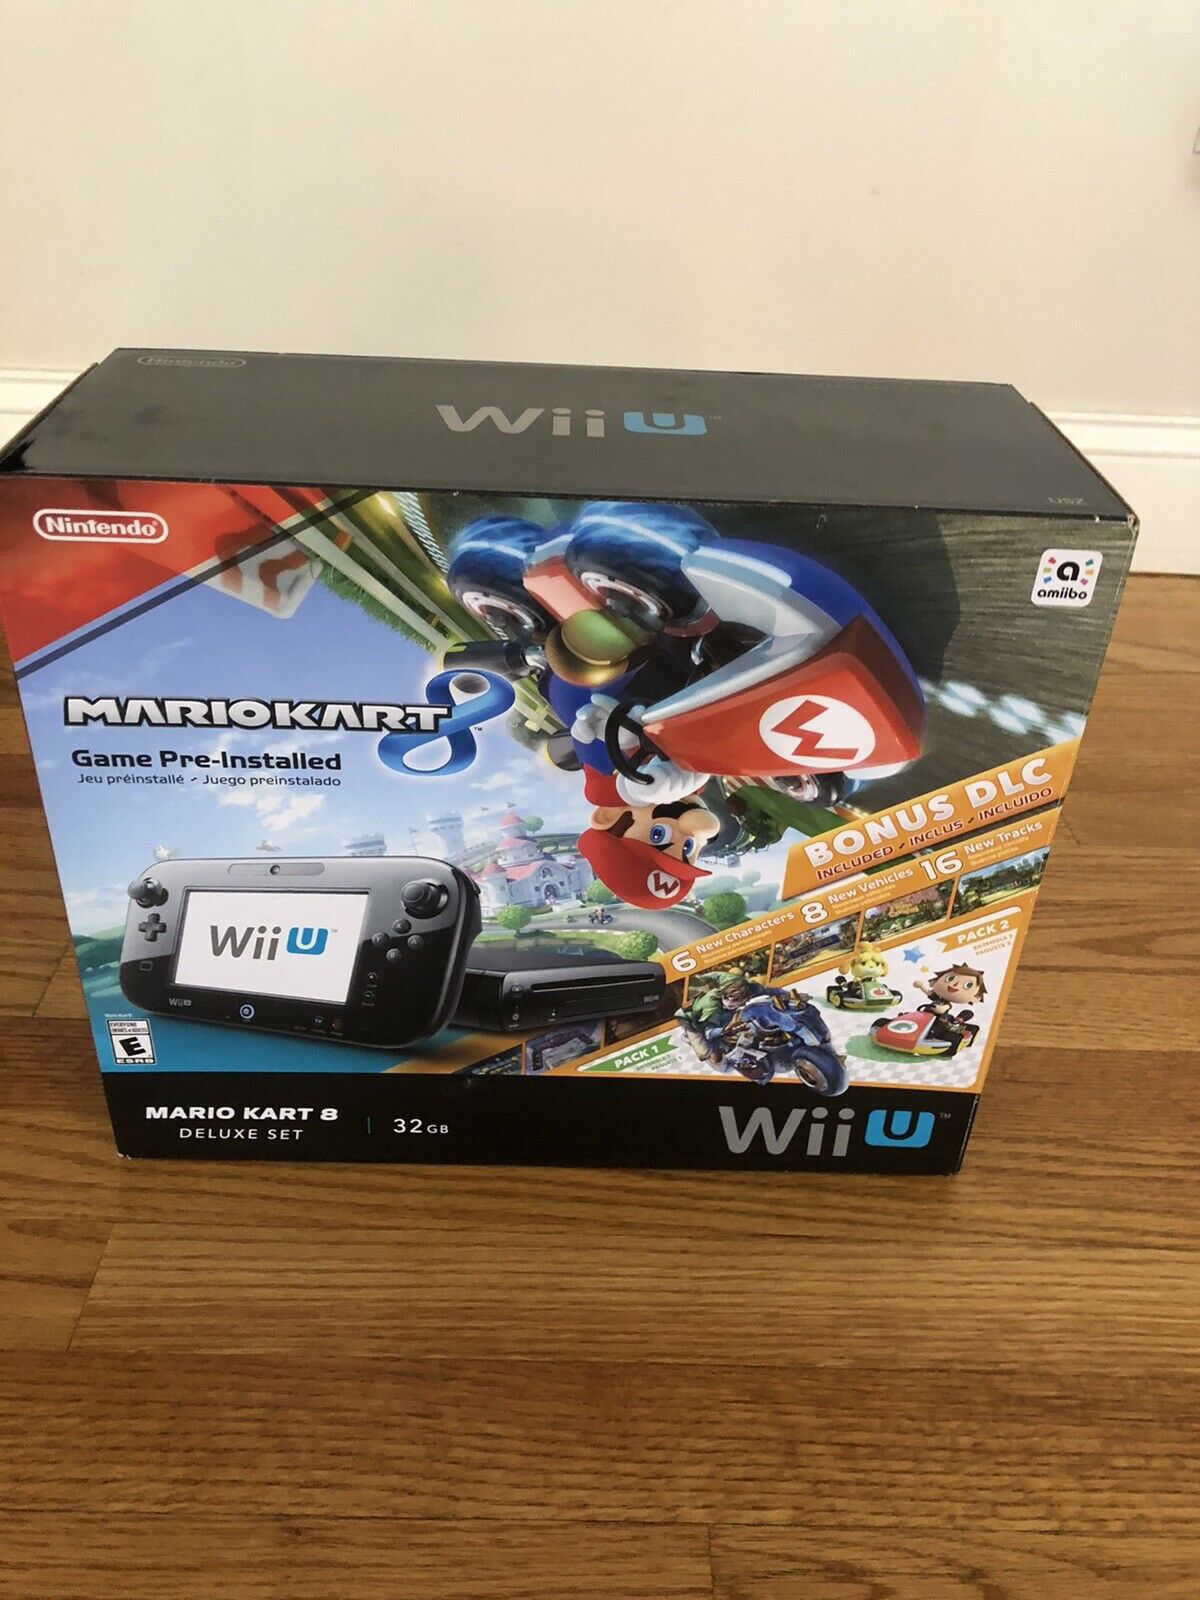 Nintendo Wii U 32gb Mario Kart 8 Deluxe Bundle Console And14 Extra Video Games Free Ship 1446